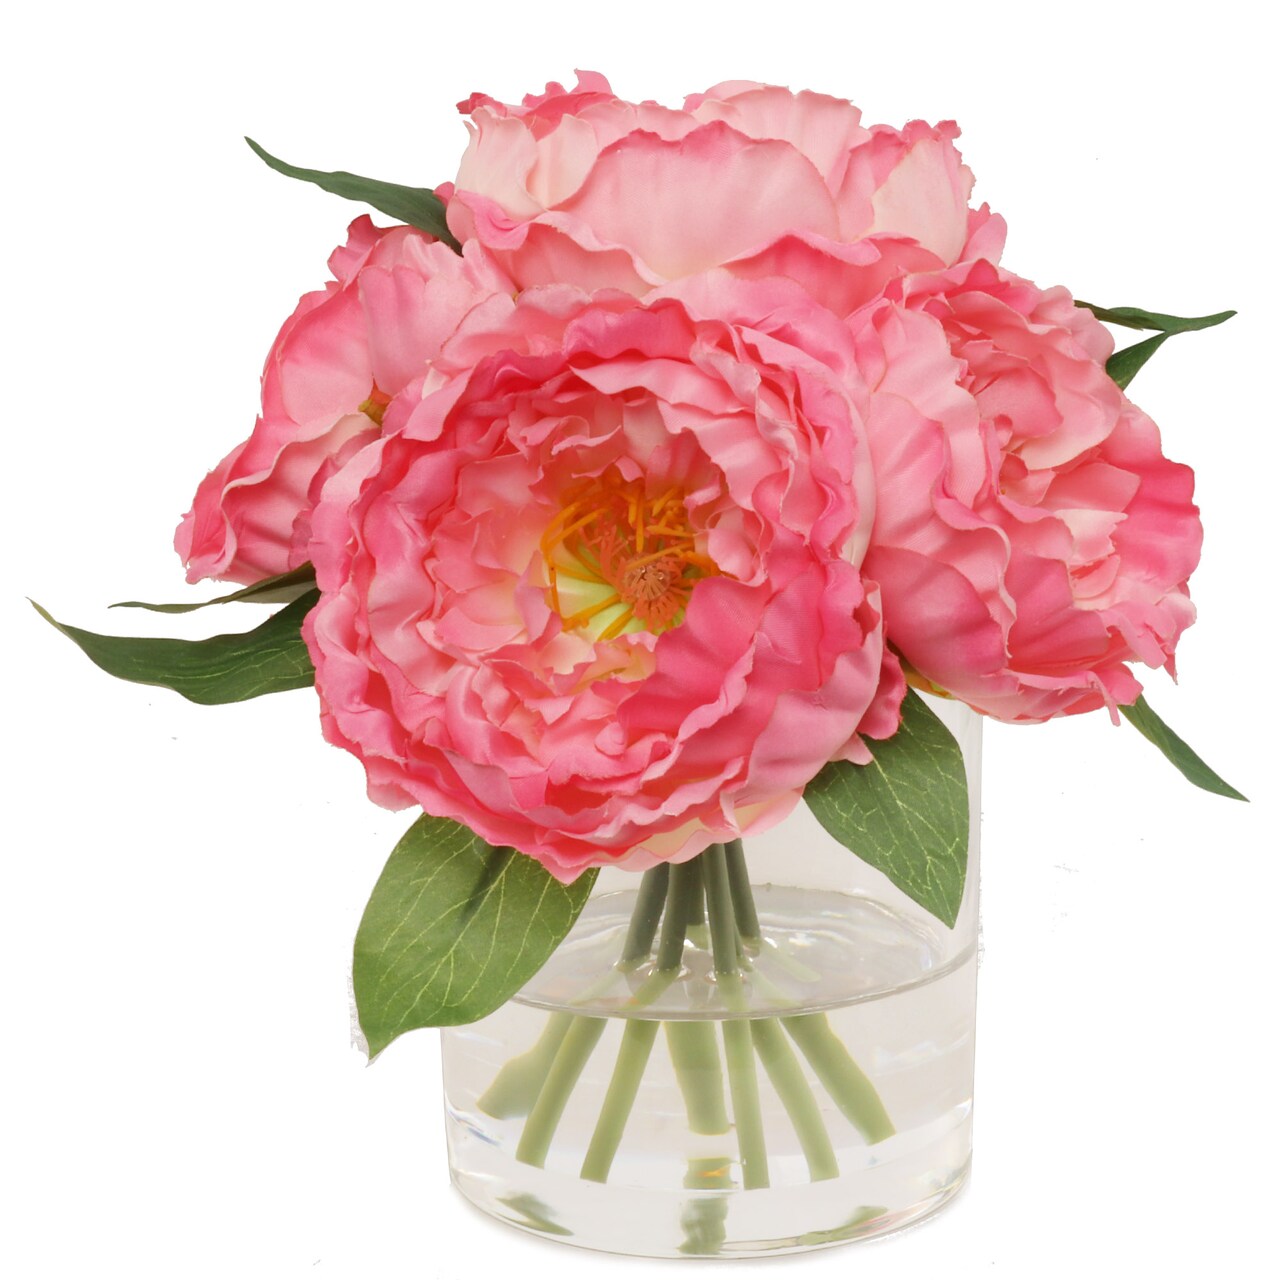 Luxury Blooms Lush Pink Peony Arrangement with 7 Fronds in Sophisticated Glass Vase - Real Looking Artificial Flowers for Home Decor, Elegant Table Centerpiece, Office Enhancer, Wedding and Special Occasion Decorations